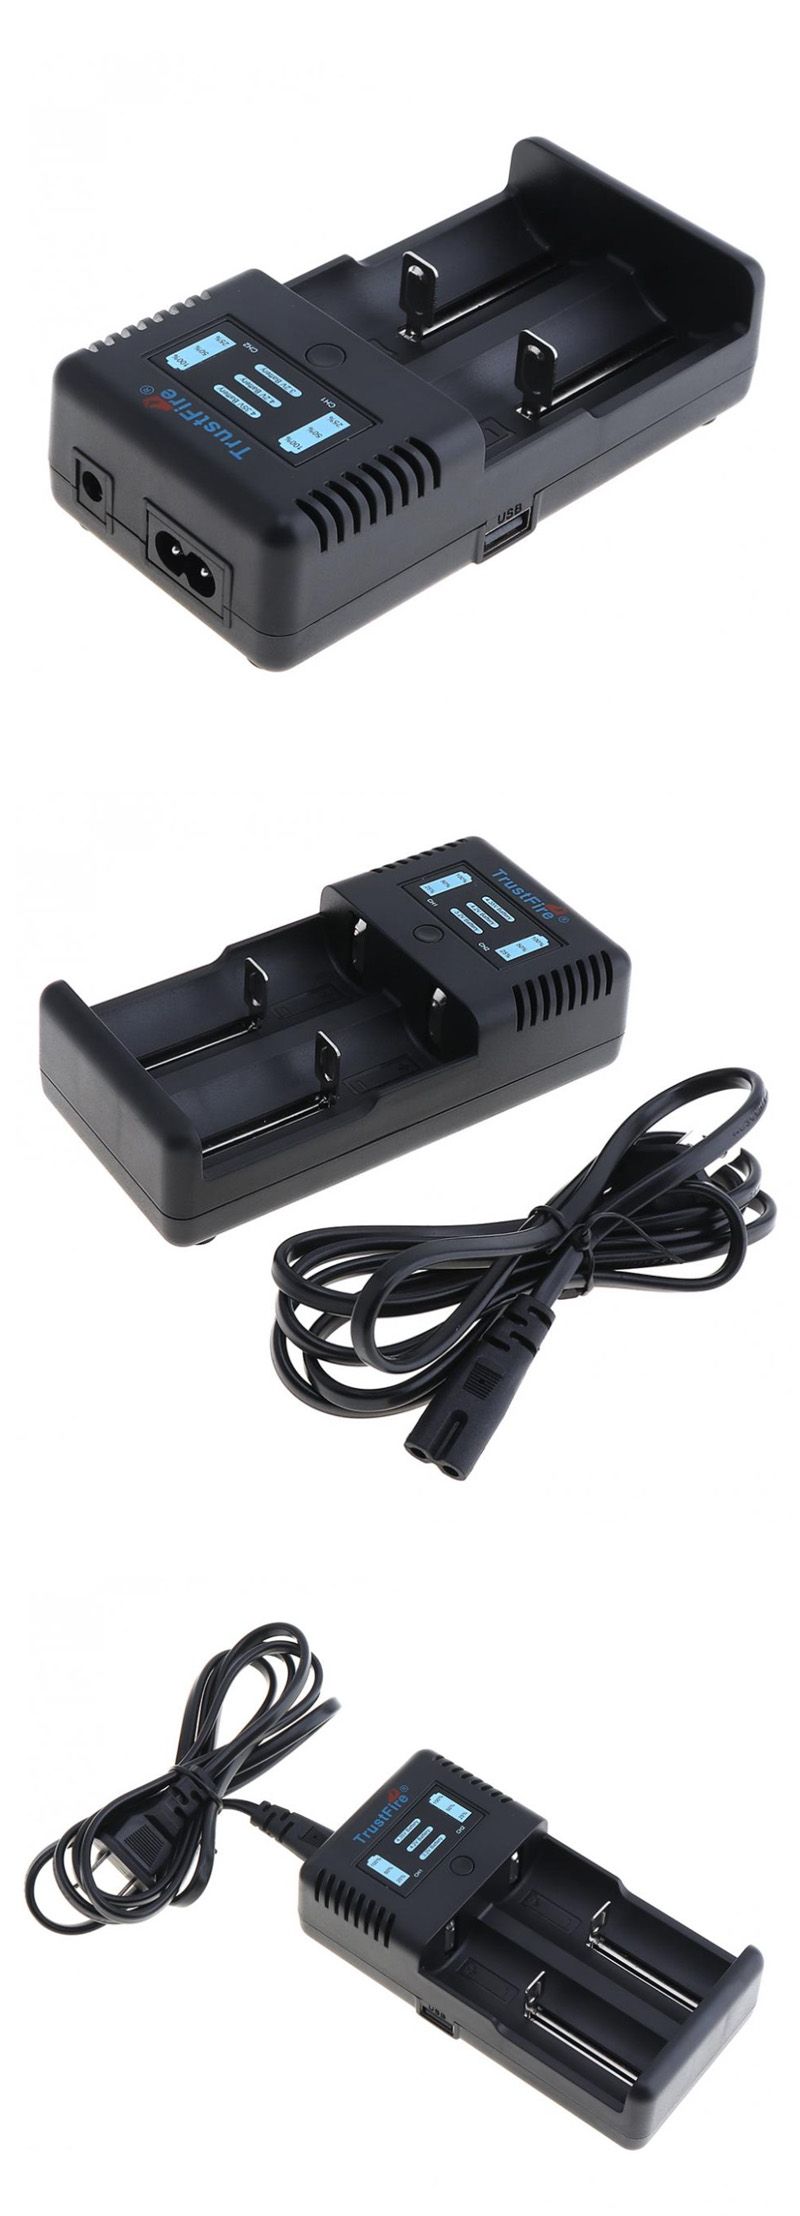 TrustFire-TR-019-Intelligent-Fast-Battery-Charger-2-Slots-Charger-Li-ion-Battery-For-186502665025500-1462825